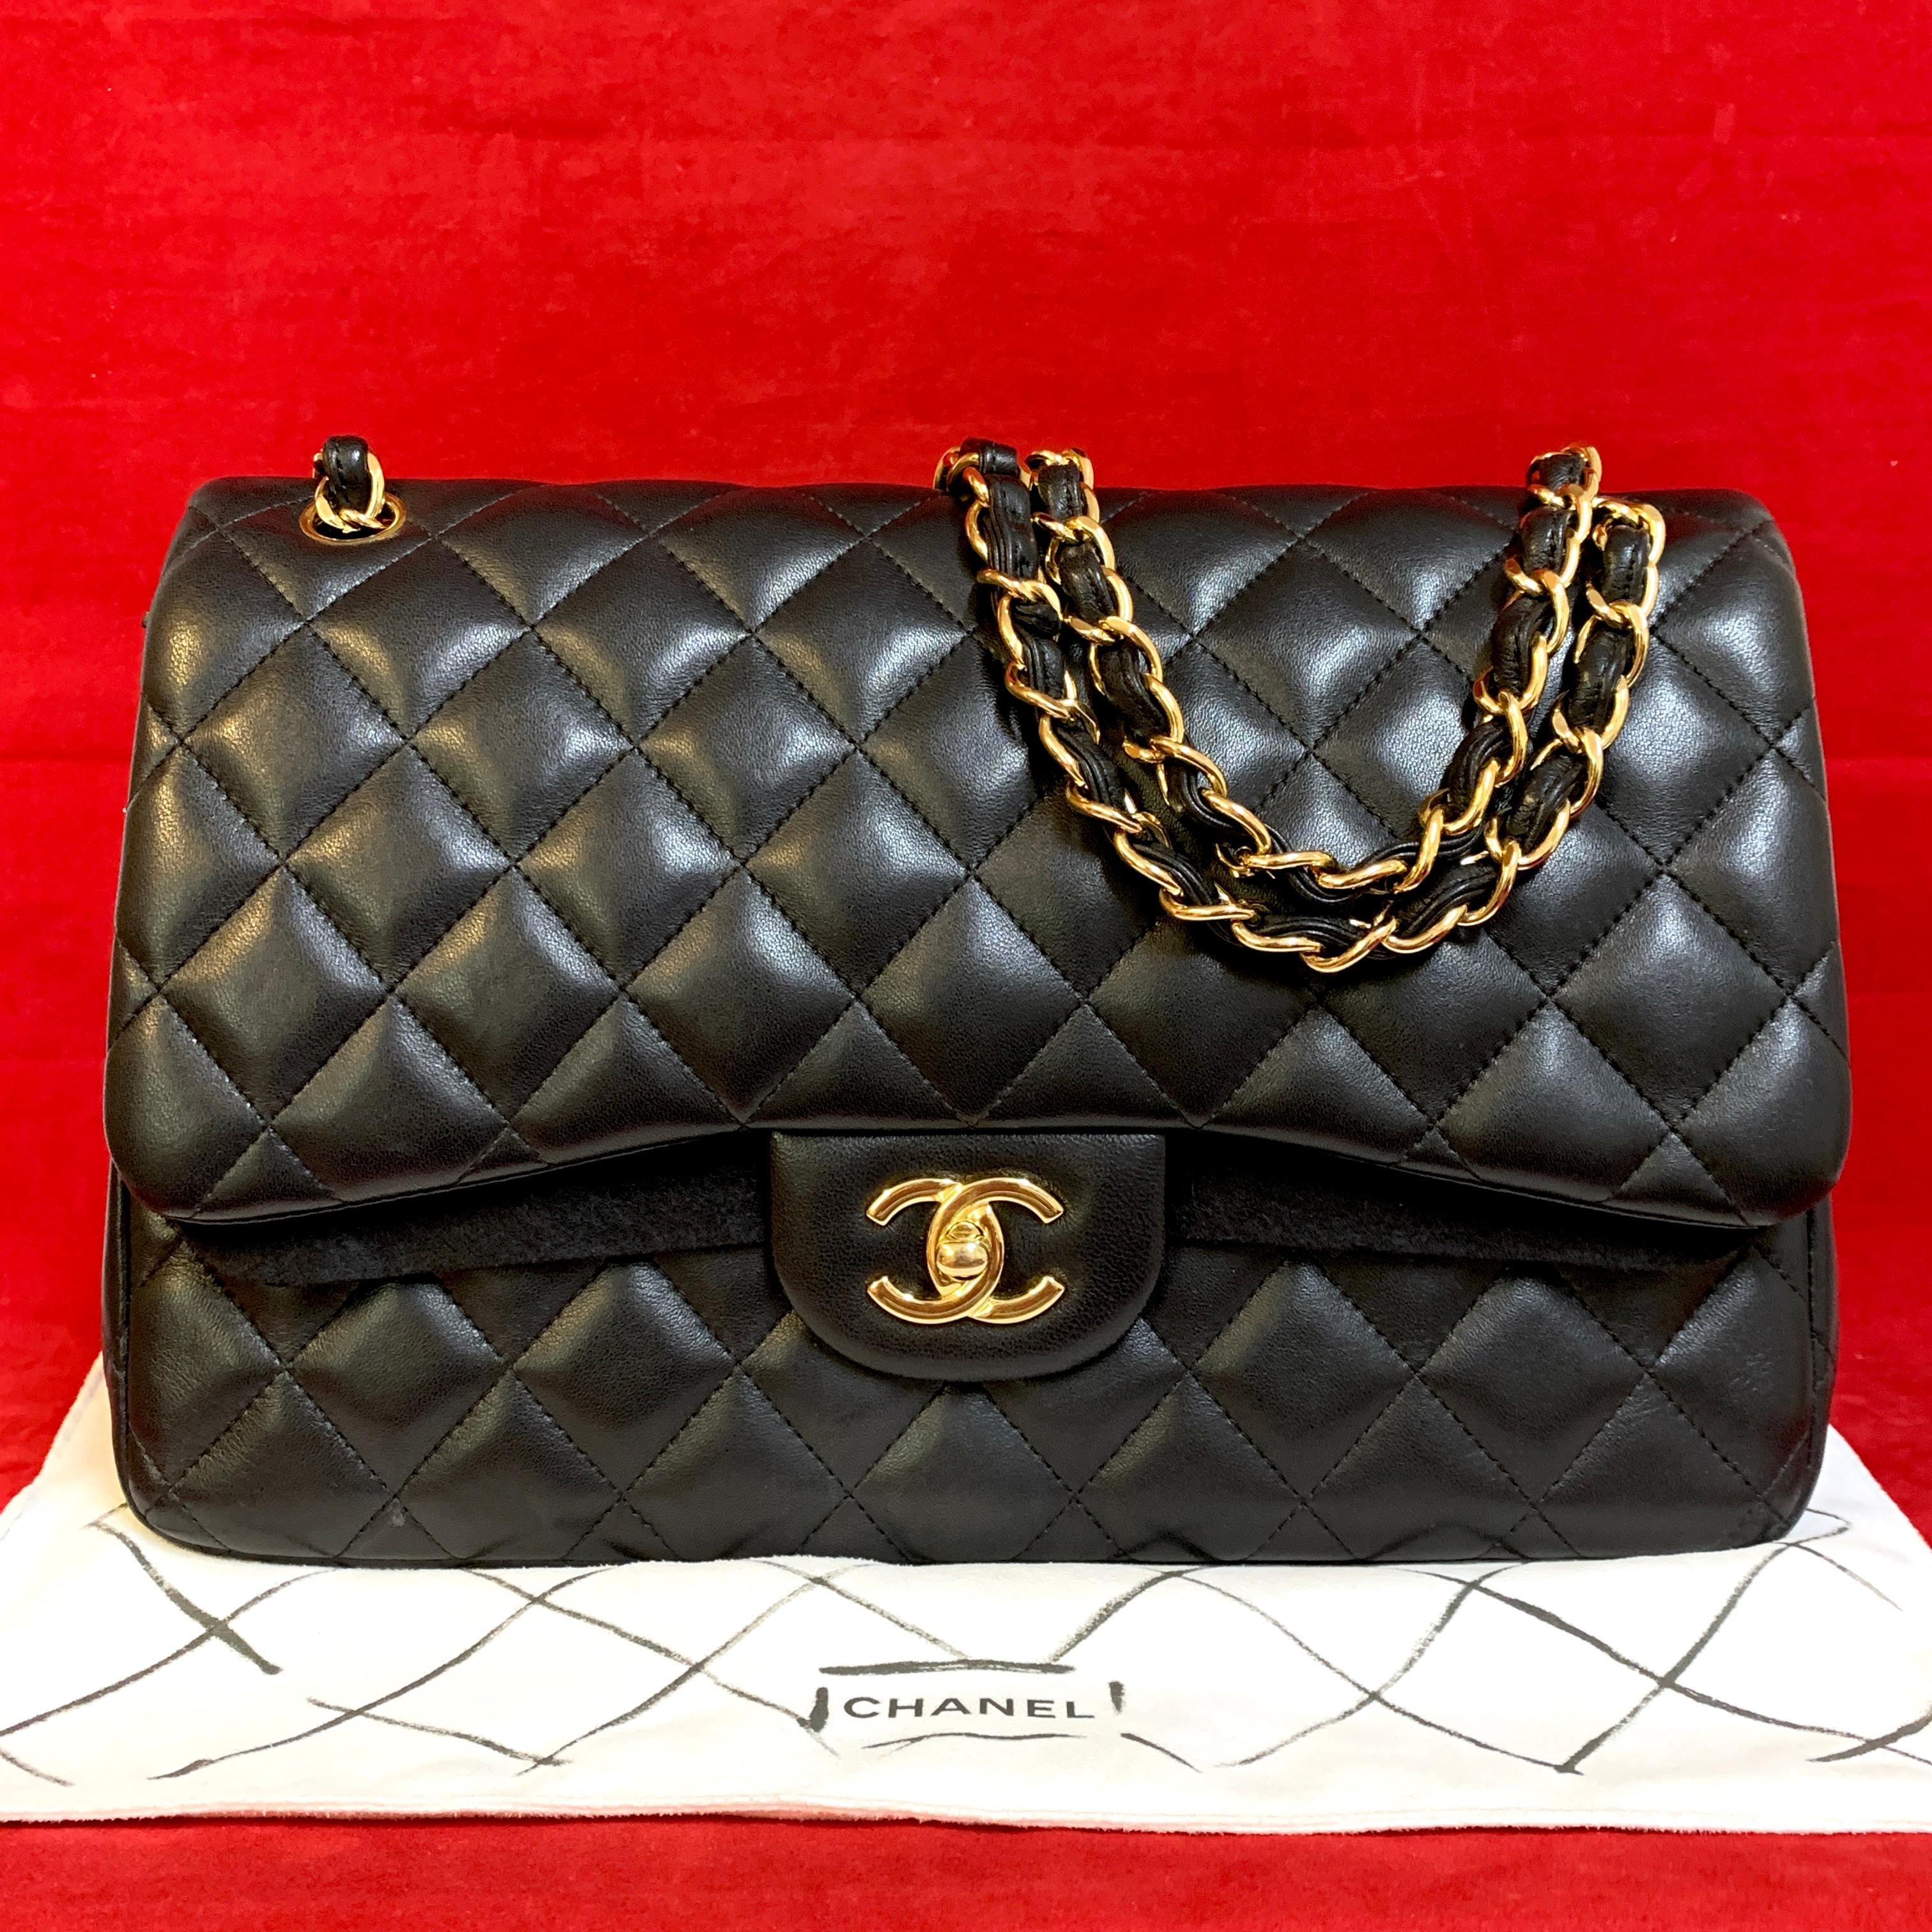 CHANEL classic double flap Bag Jumbo made of black quilted lambskin with gold hardware.
Model number: A58600

The bag is in a very good condition and has minimal signs of use.

The delivery includes:
- Chanel double flap bag Jumbo
- Dustbag
-